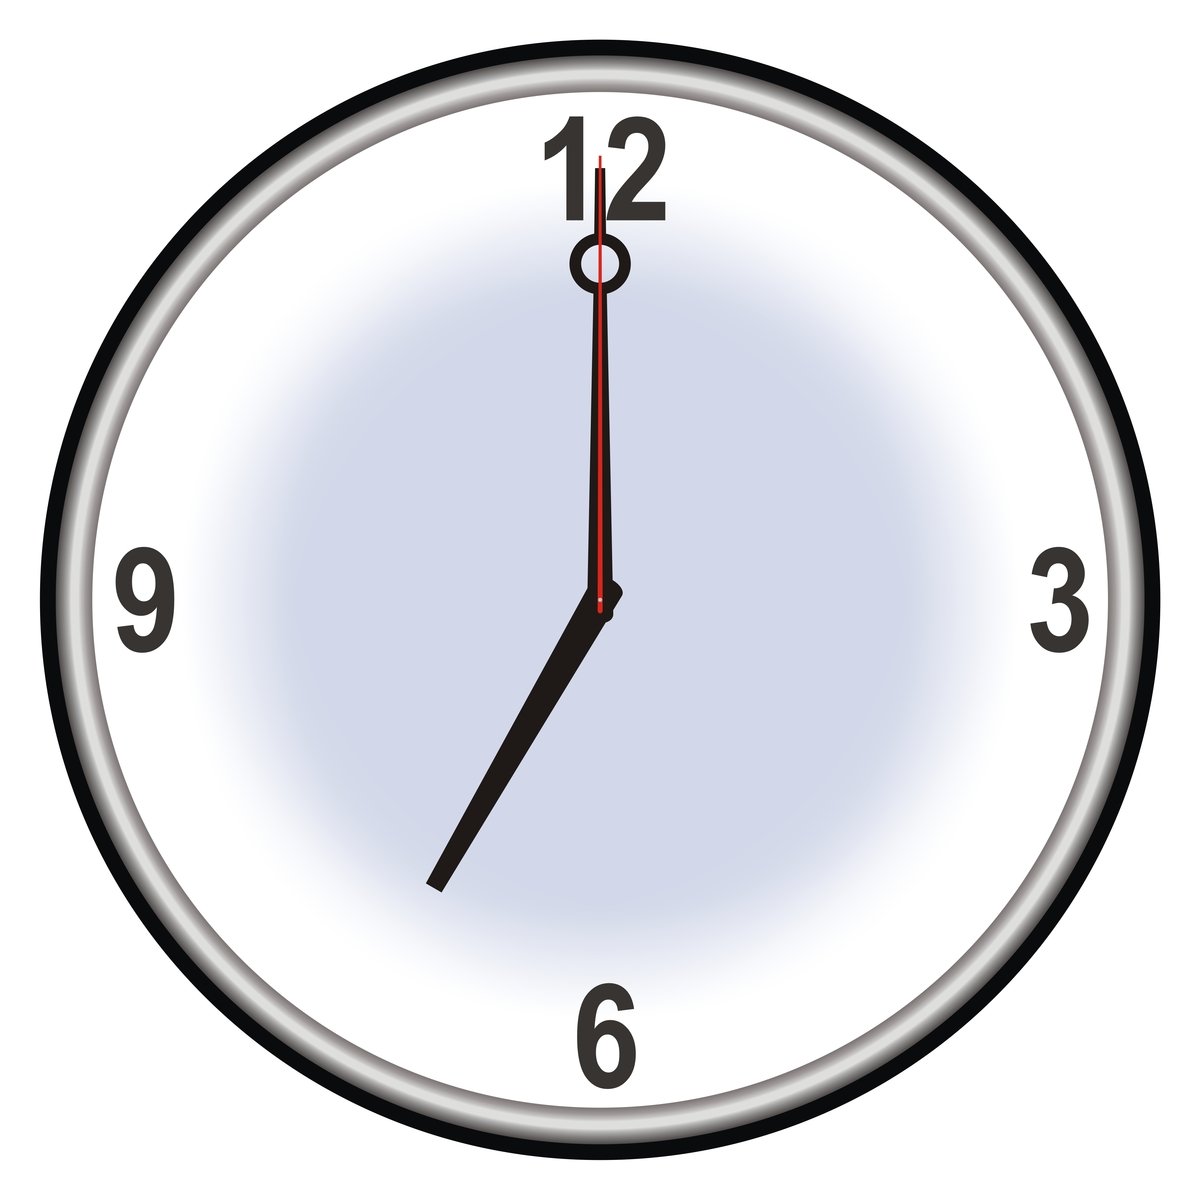 a clock showing the time two and three o'clock face